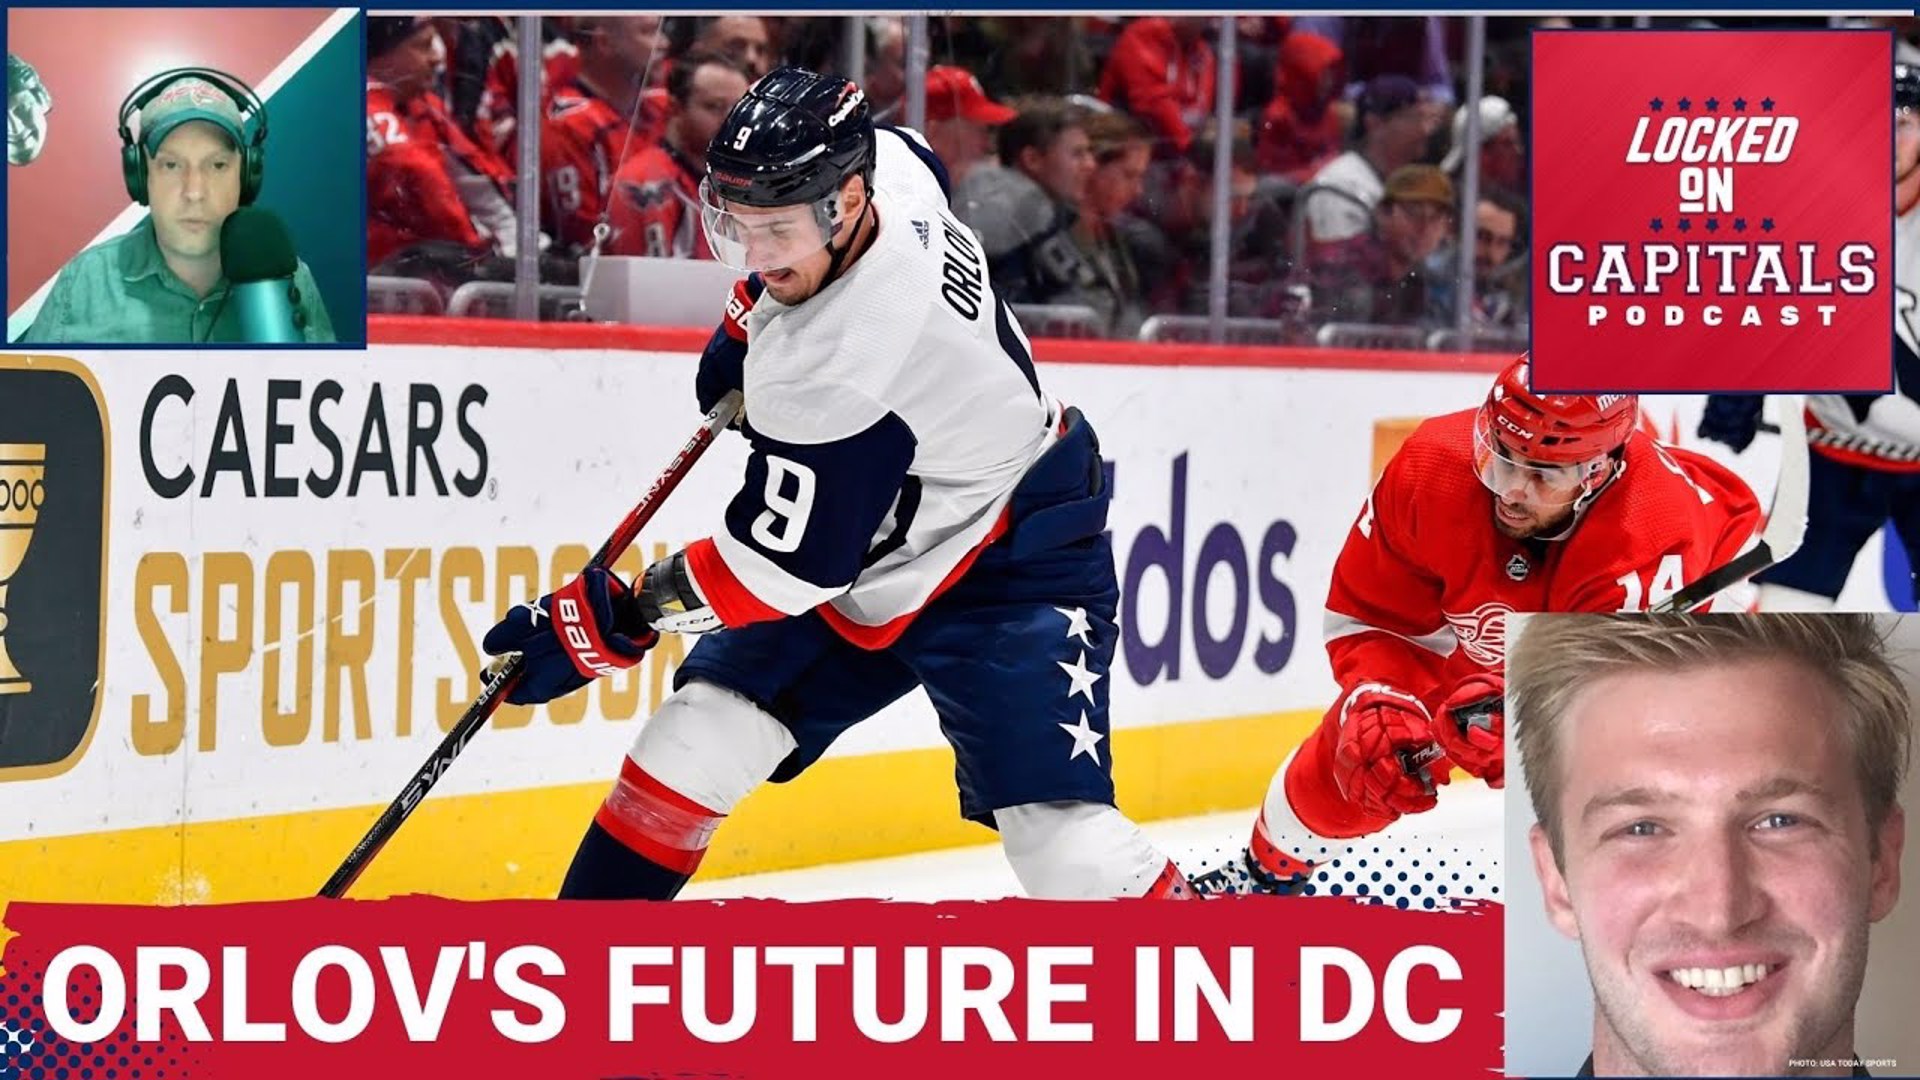 In this edition of Locked on Capitals Dan is joined by Roman Stubbs of the Washington Post.